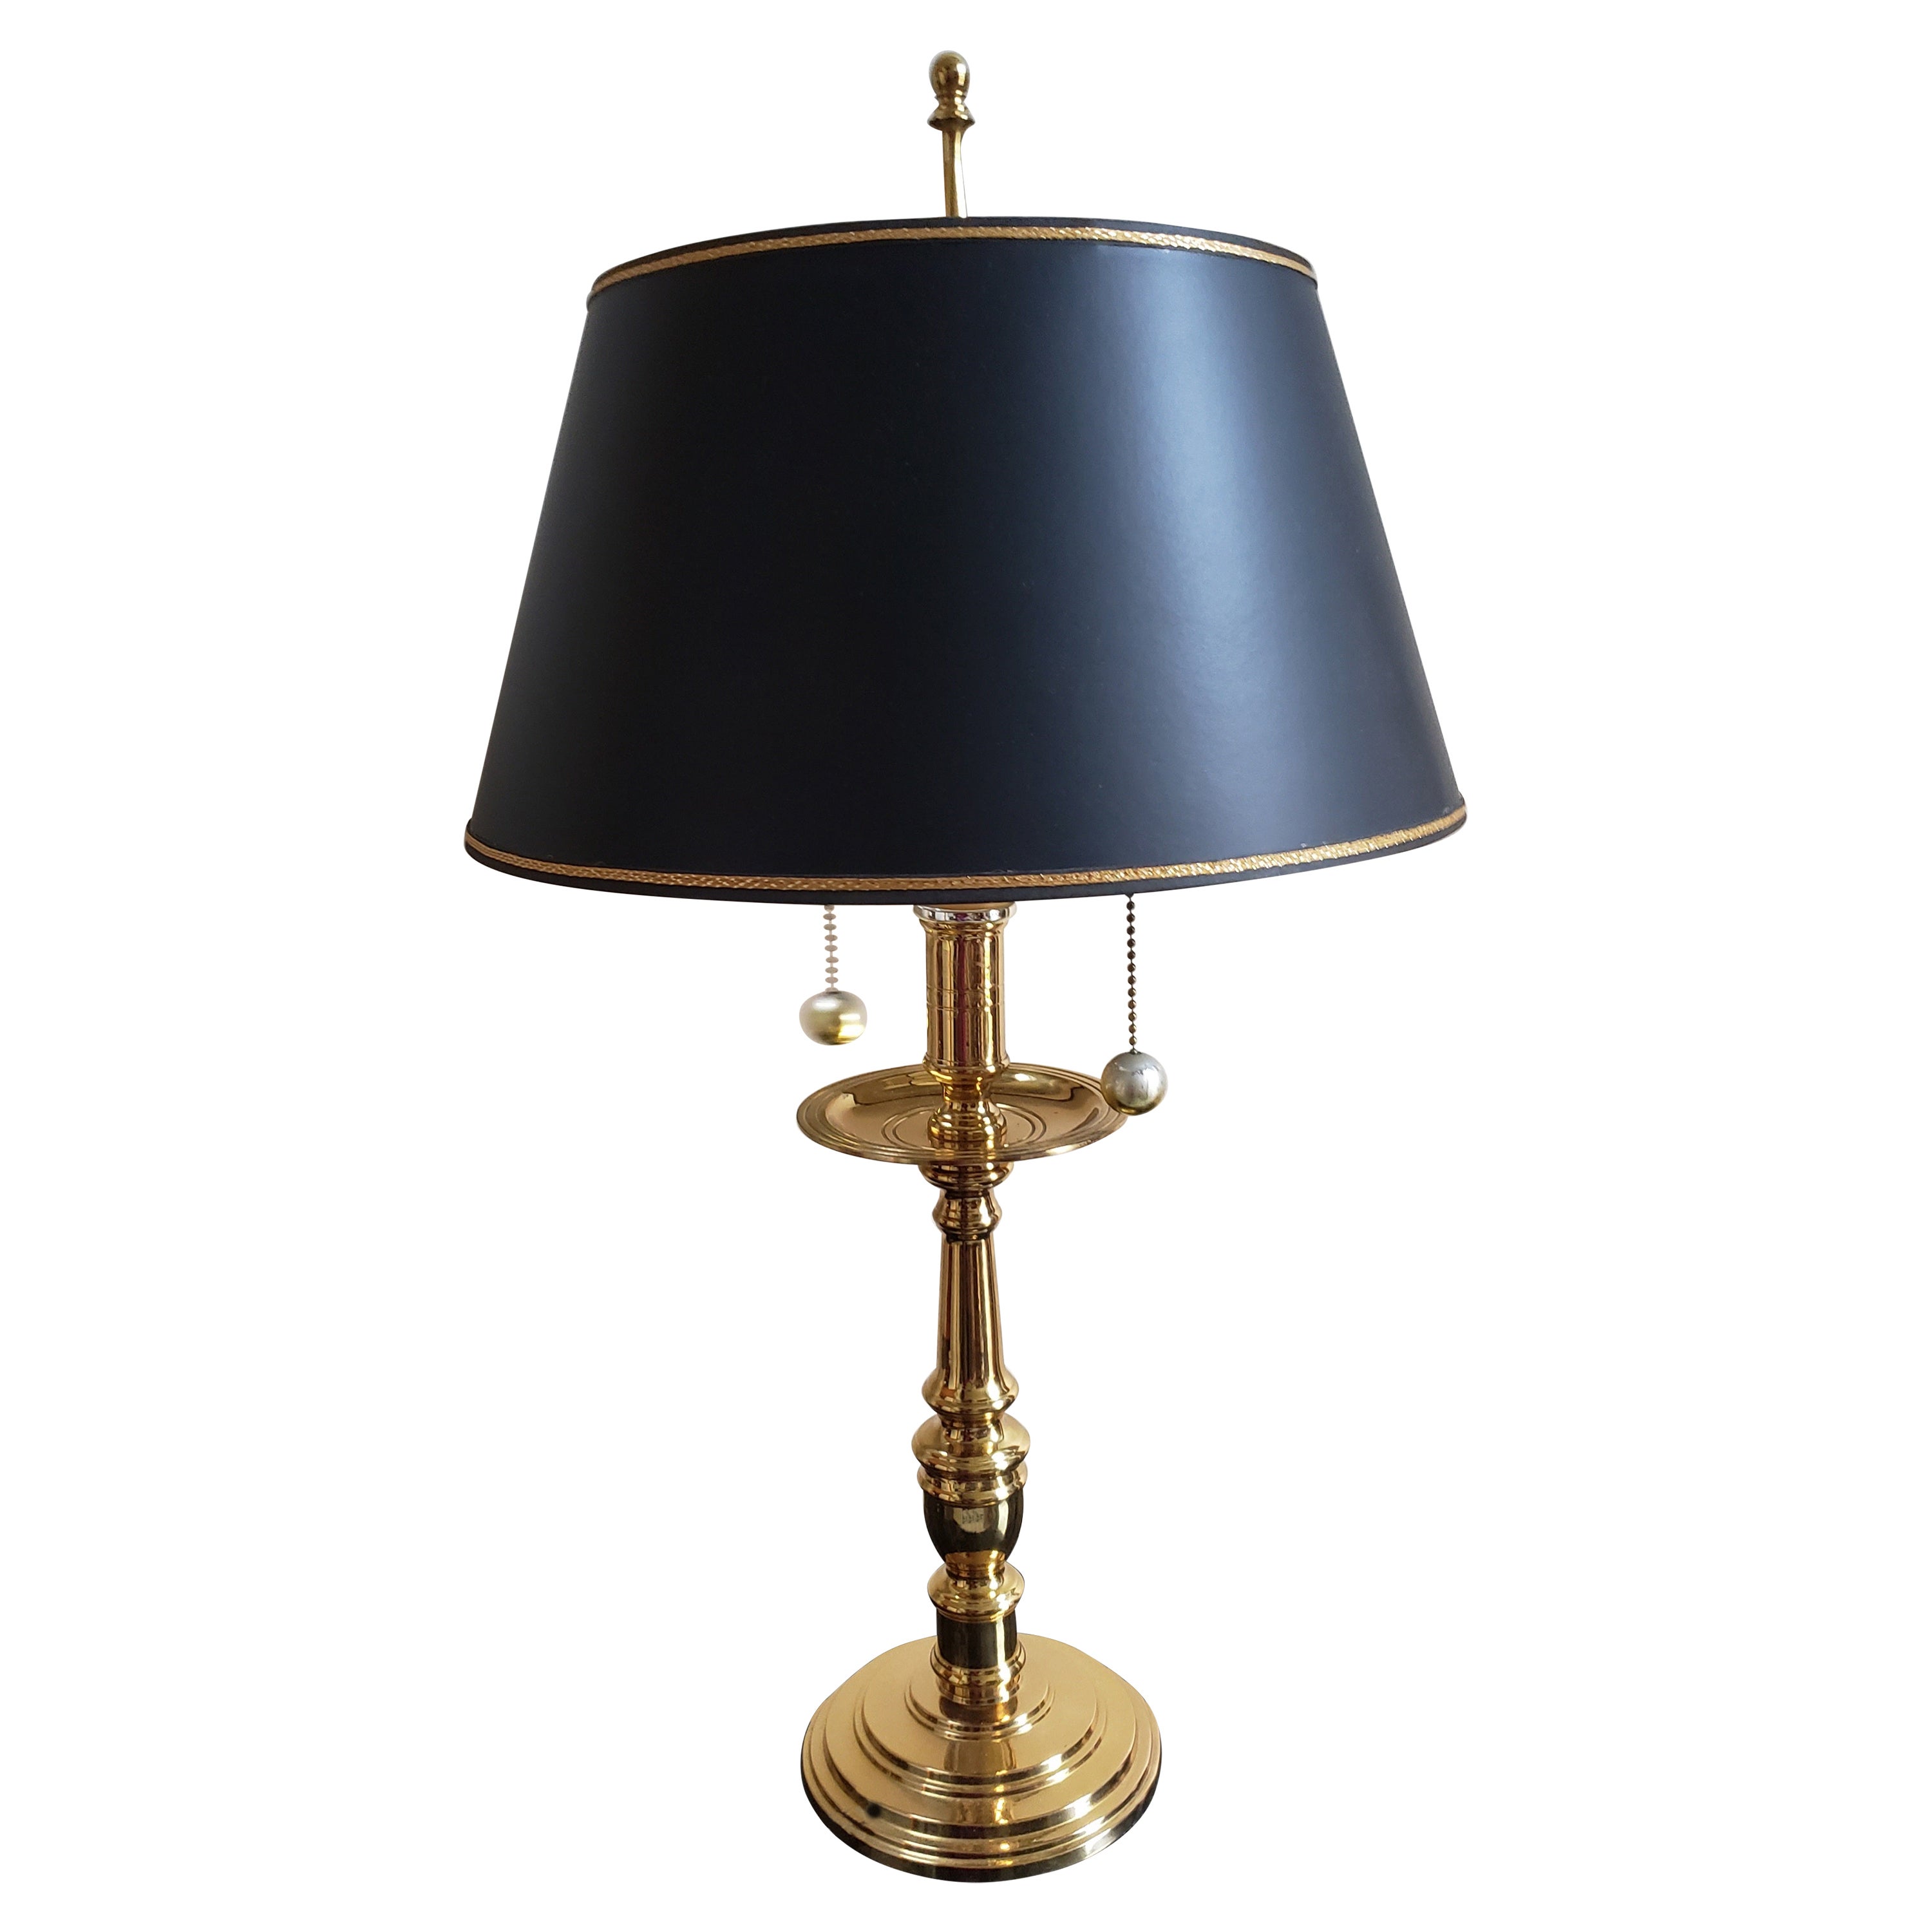 E. F. Chapman Table Lamp by Visual Comfort and Co